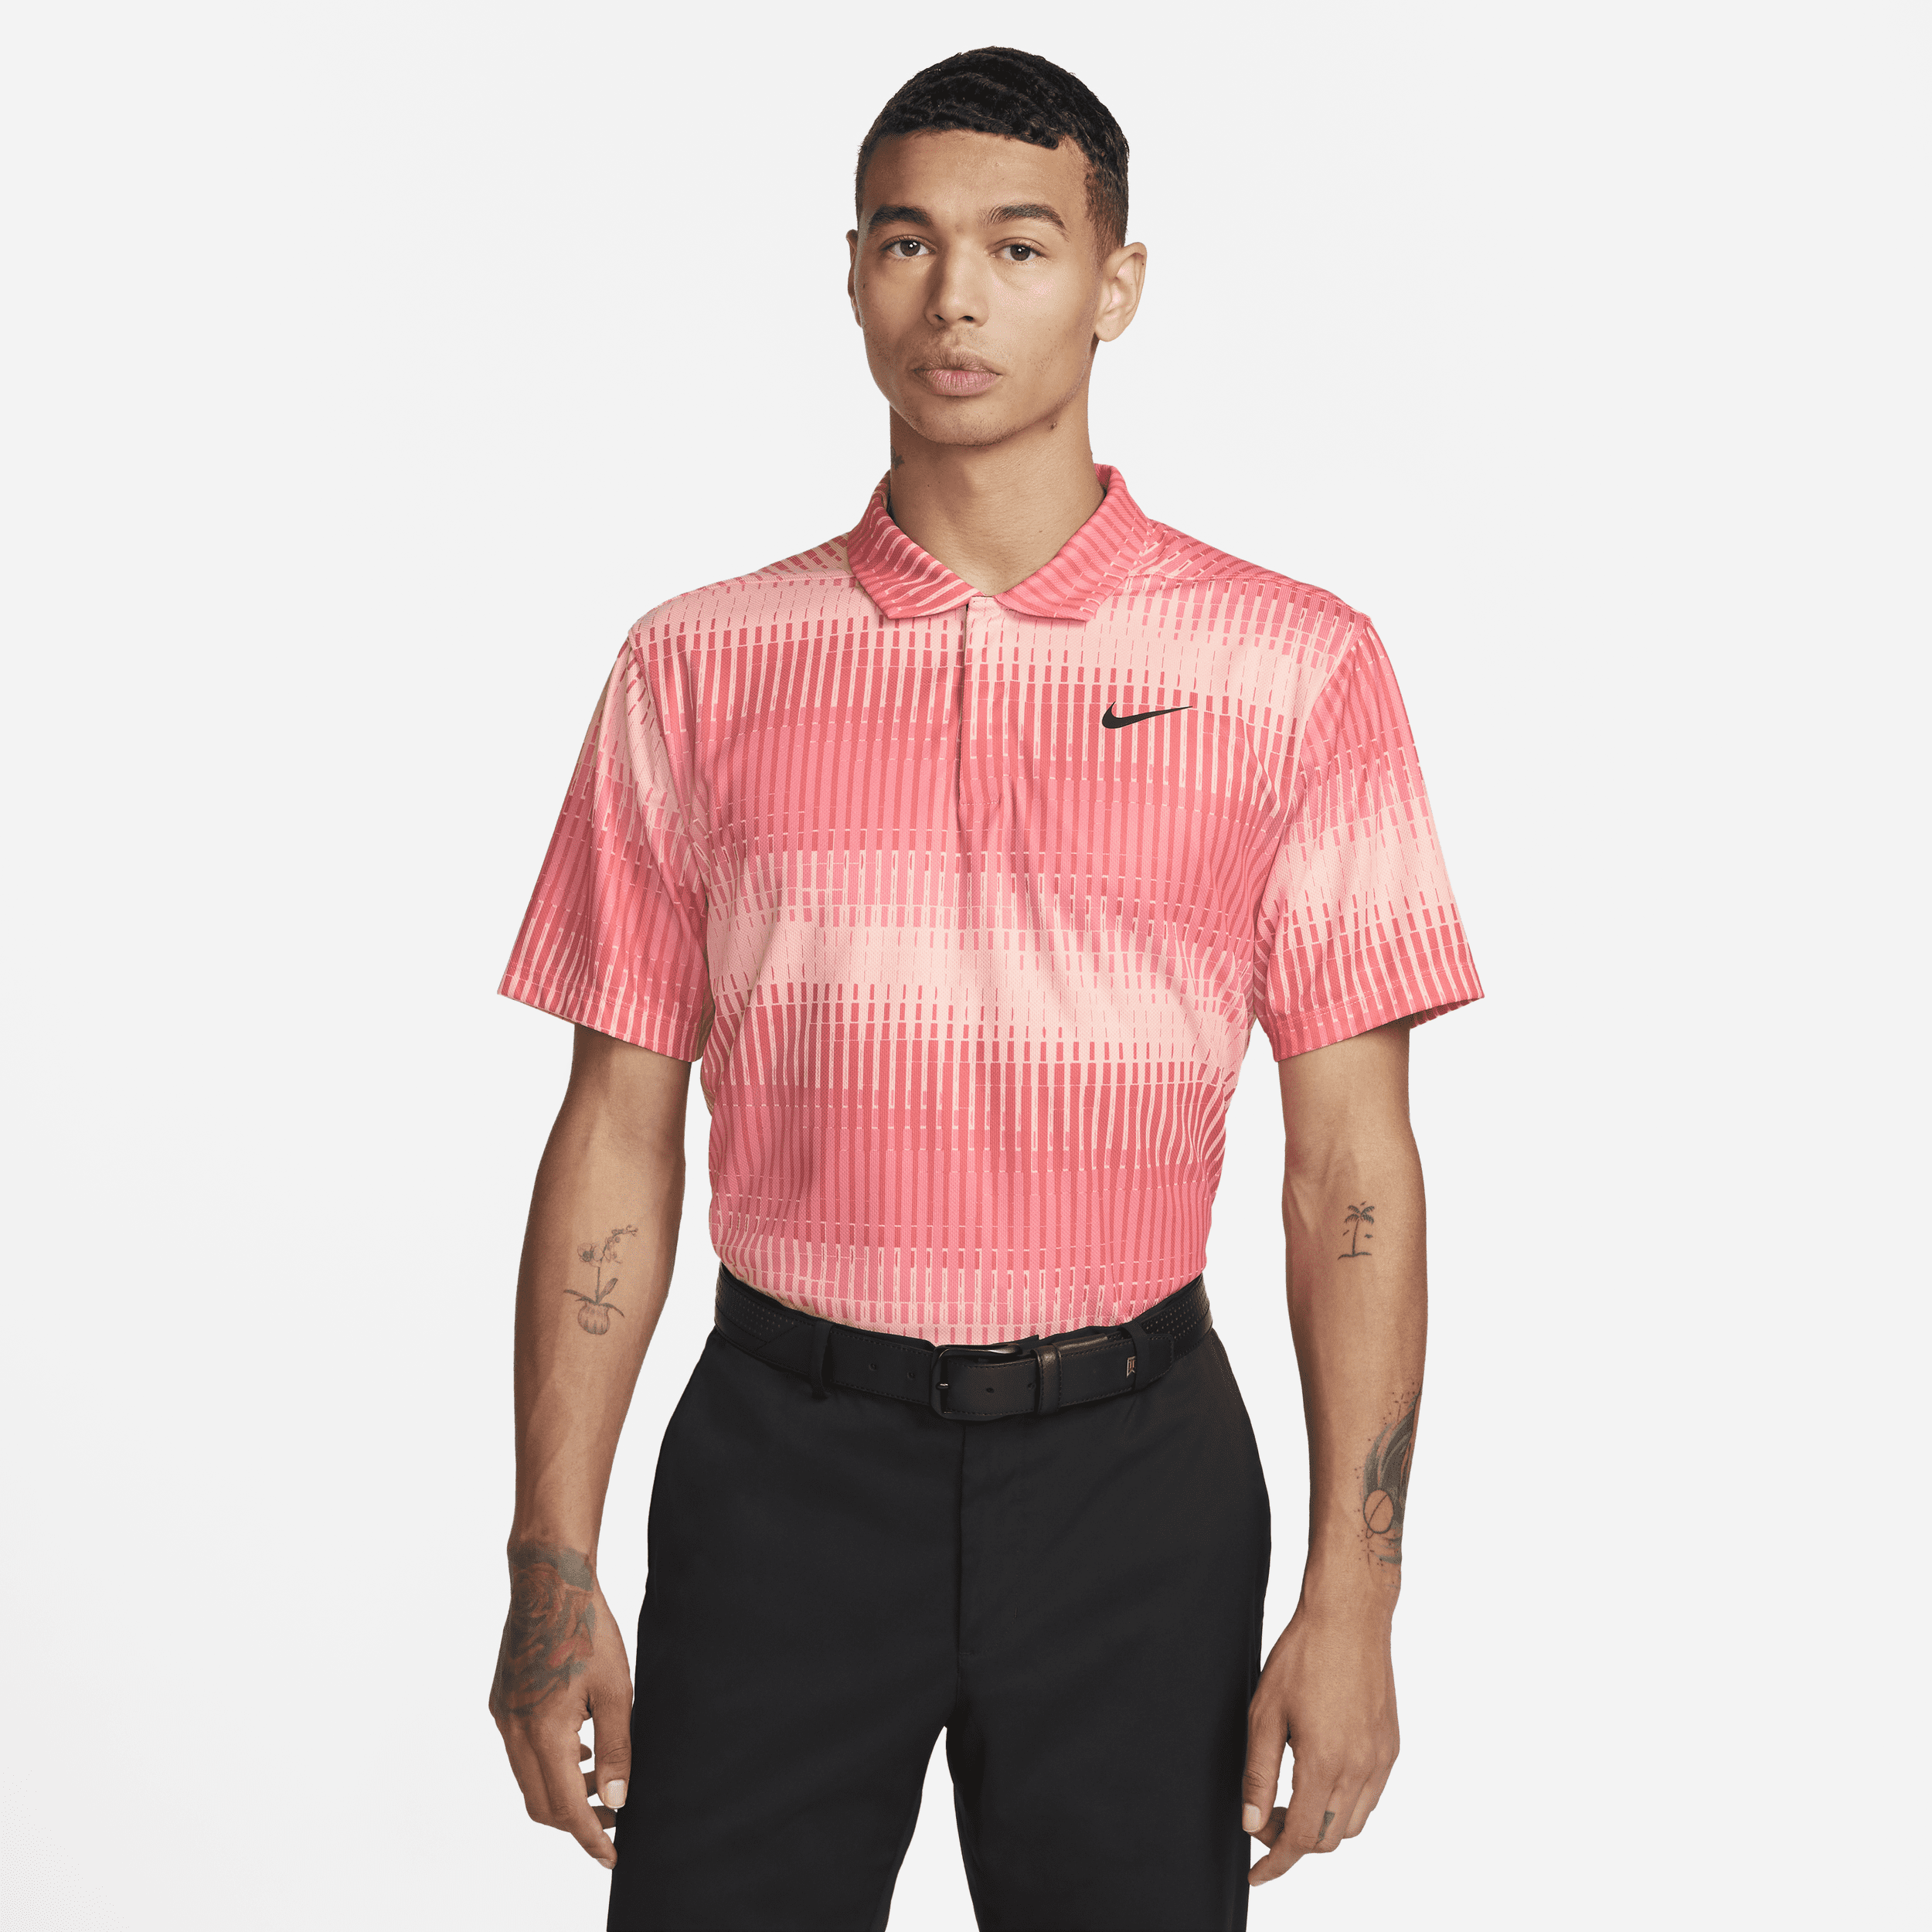 Nike Men's Dri-fit Adv Tiger Woods Golf Polo In Pink